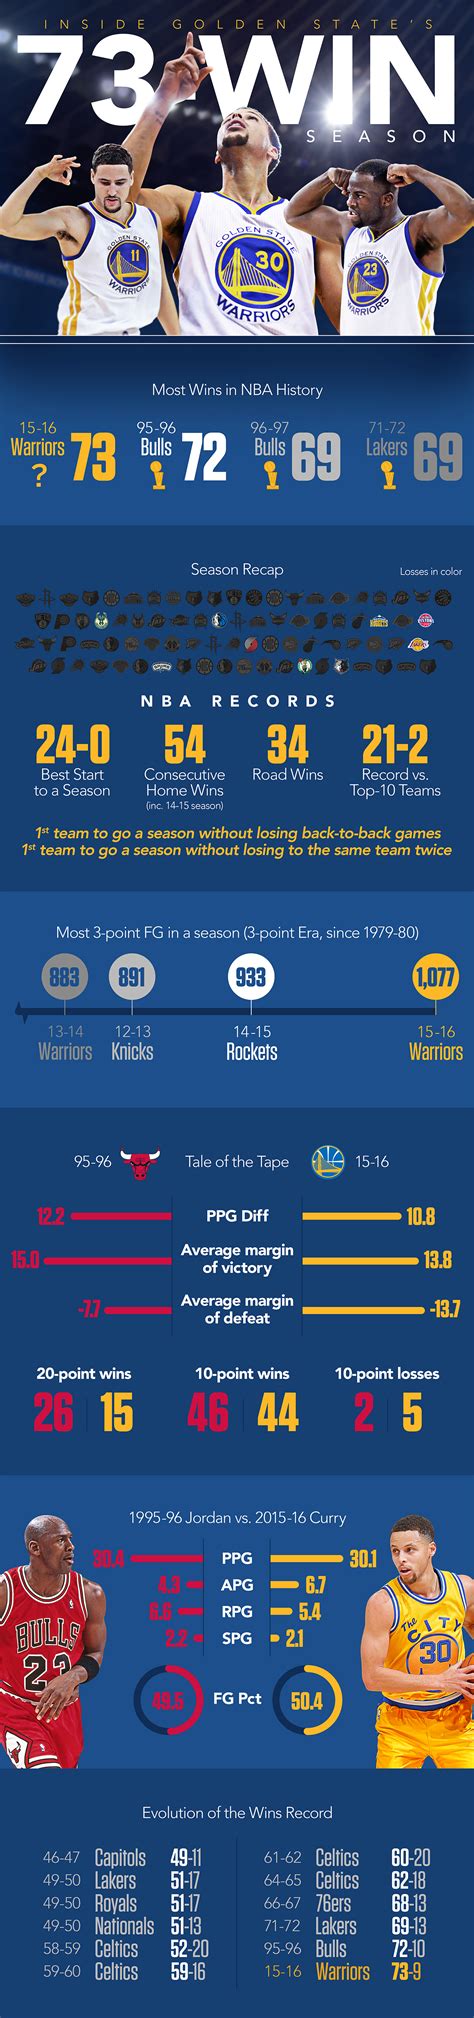 golden state warriors game 3 stats